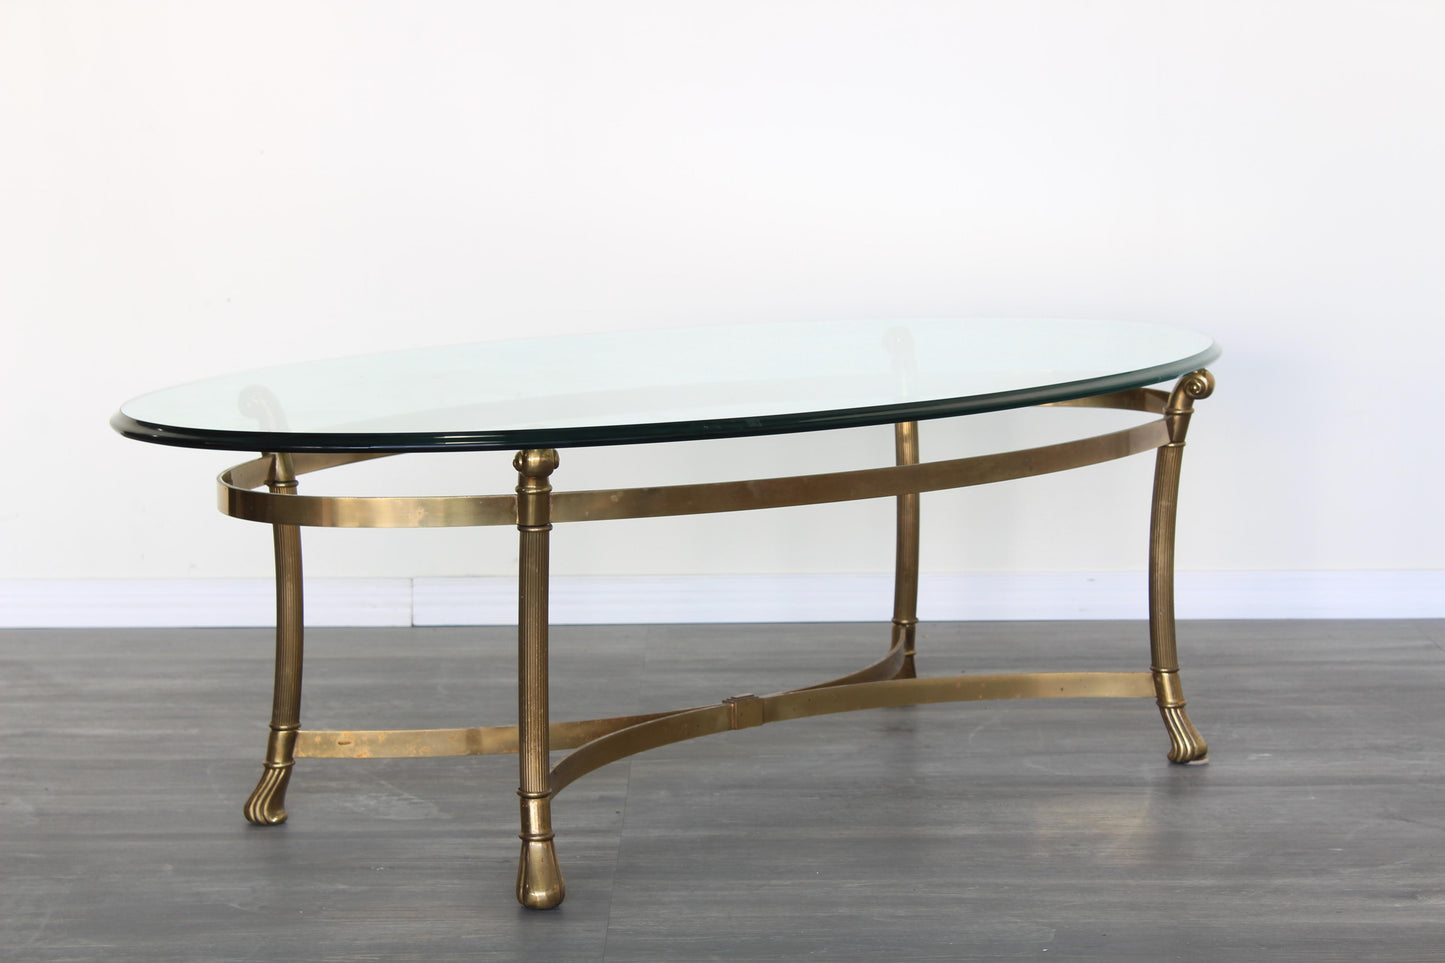 Vintage Italian Brass Coffee Table With Glass Top